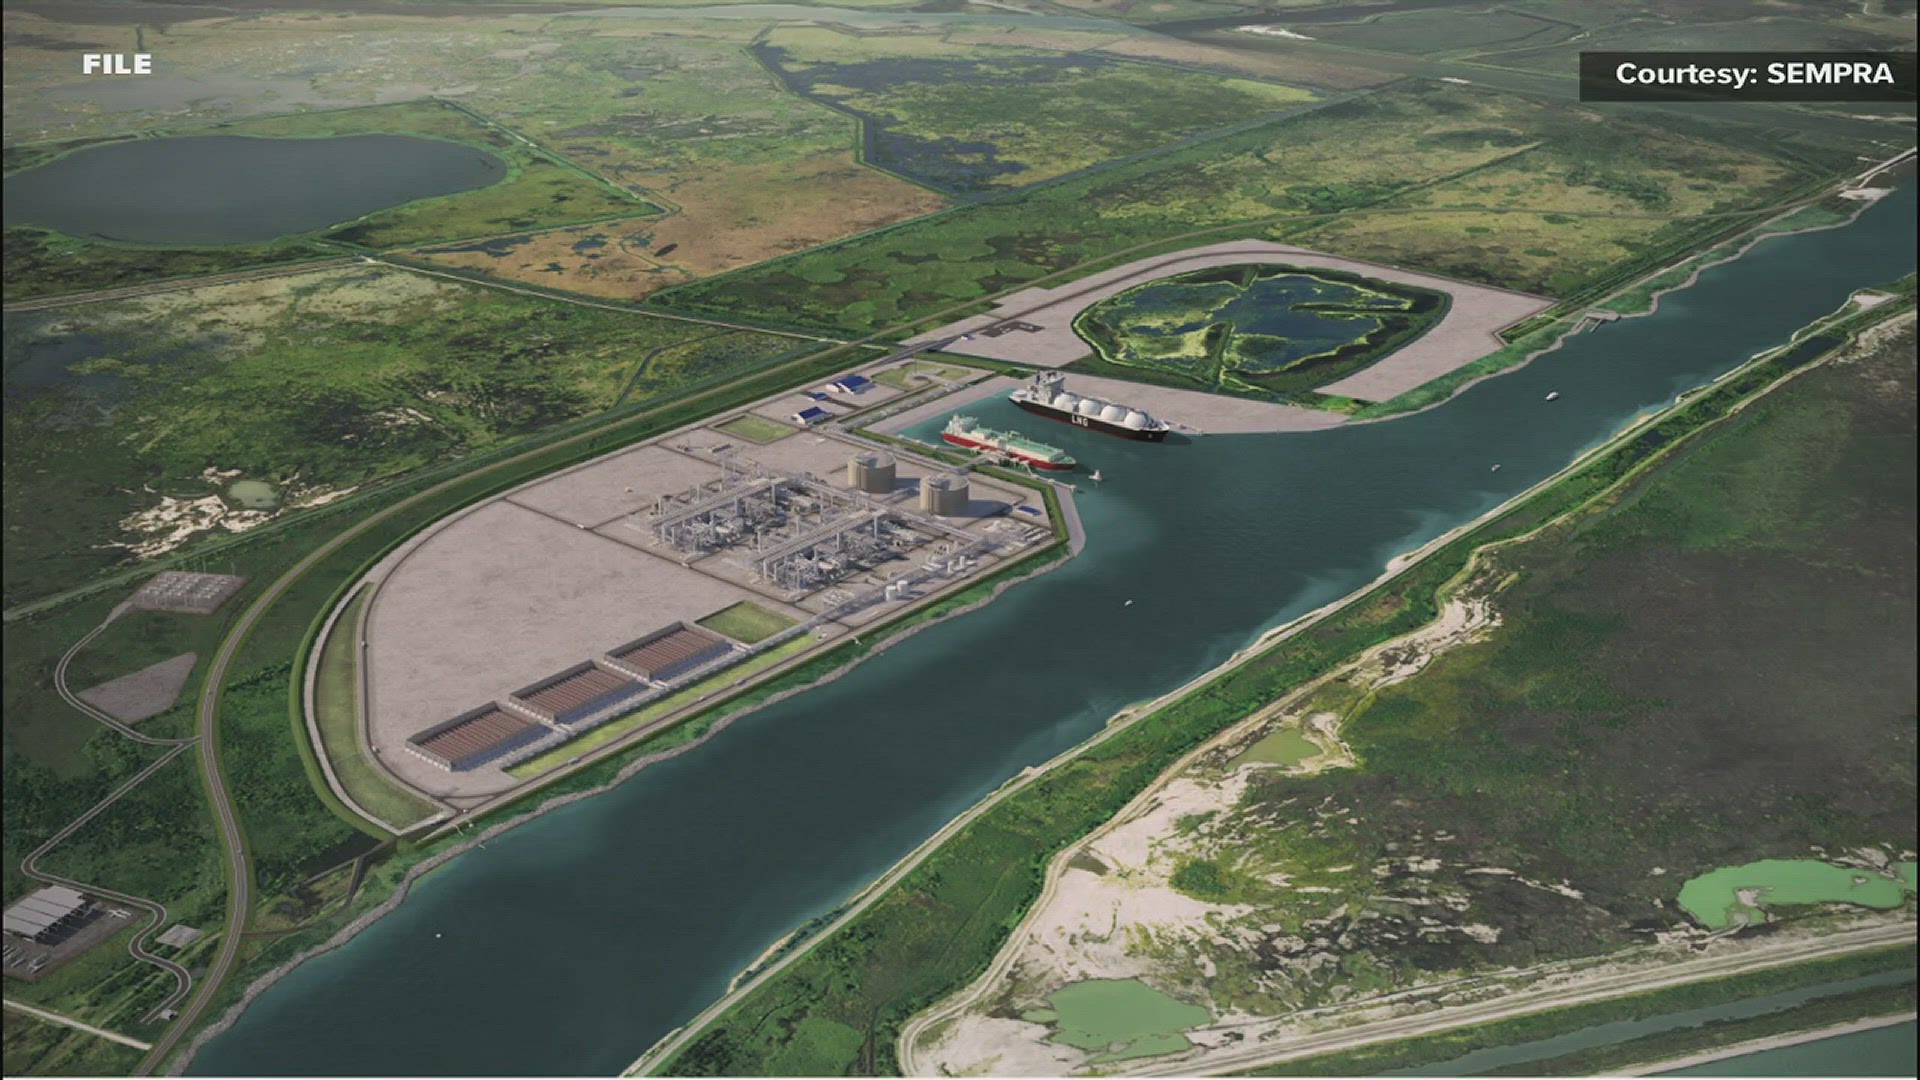 Sempra confirmed Monday that it has secured funding for phase one of its $13 billion Port Arthur LNG export facility along Texas 87 near Sabine Pass.